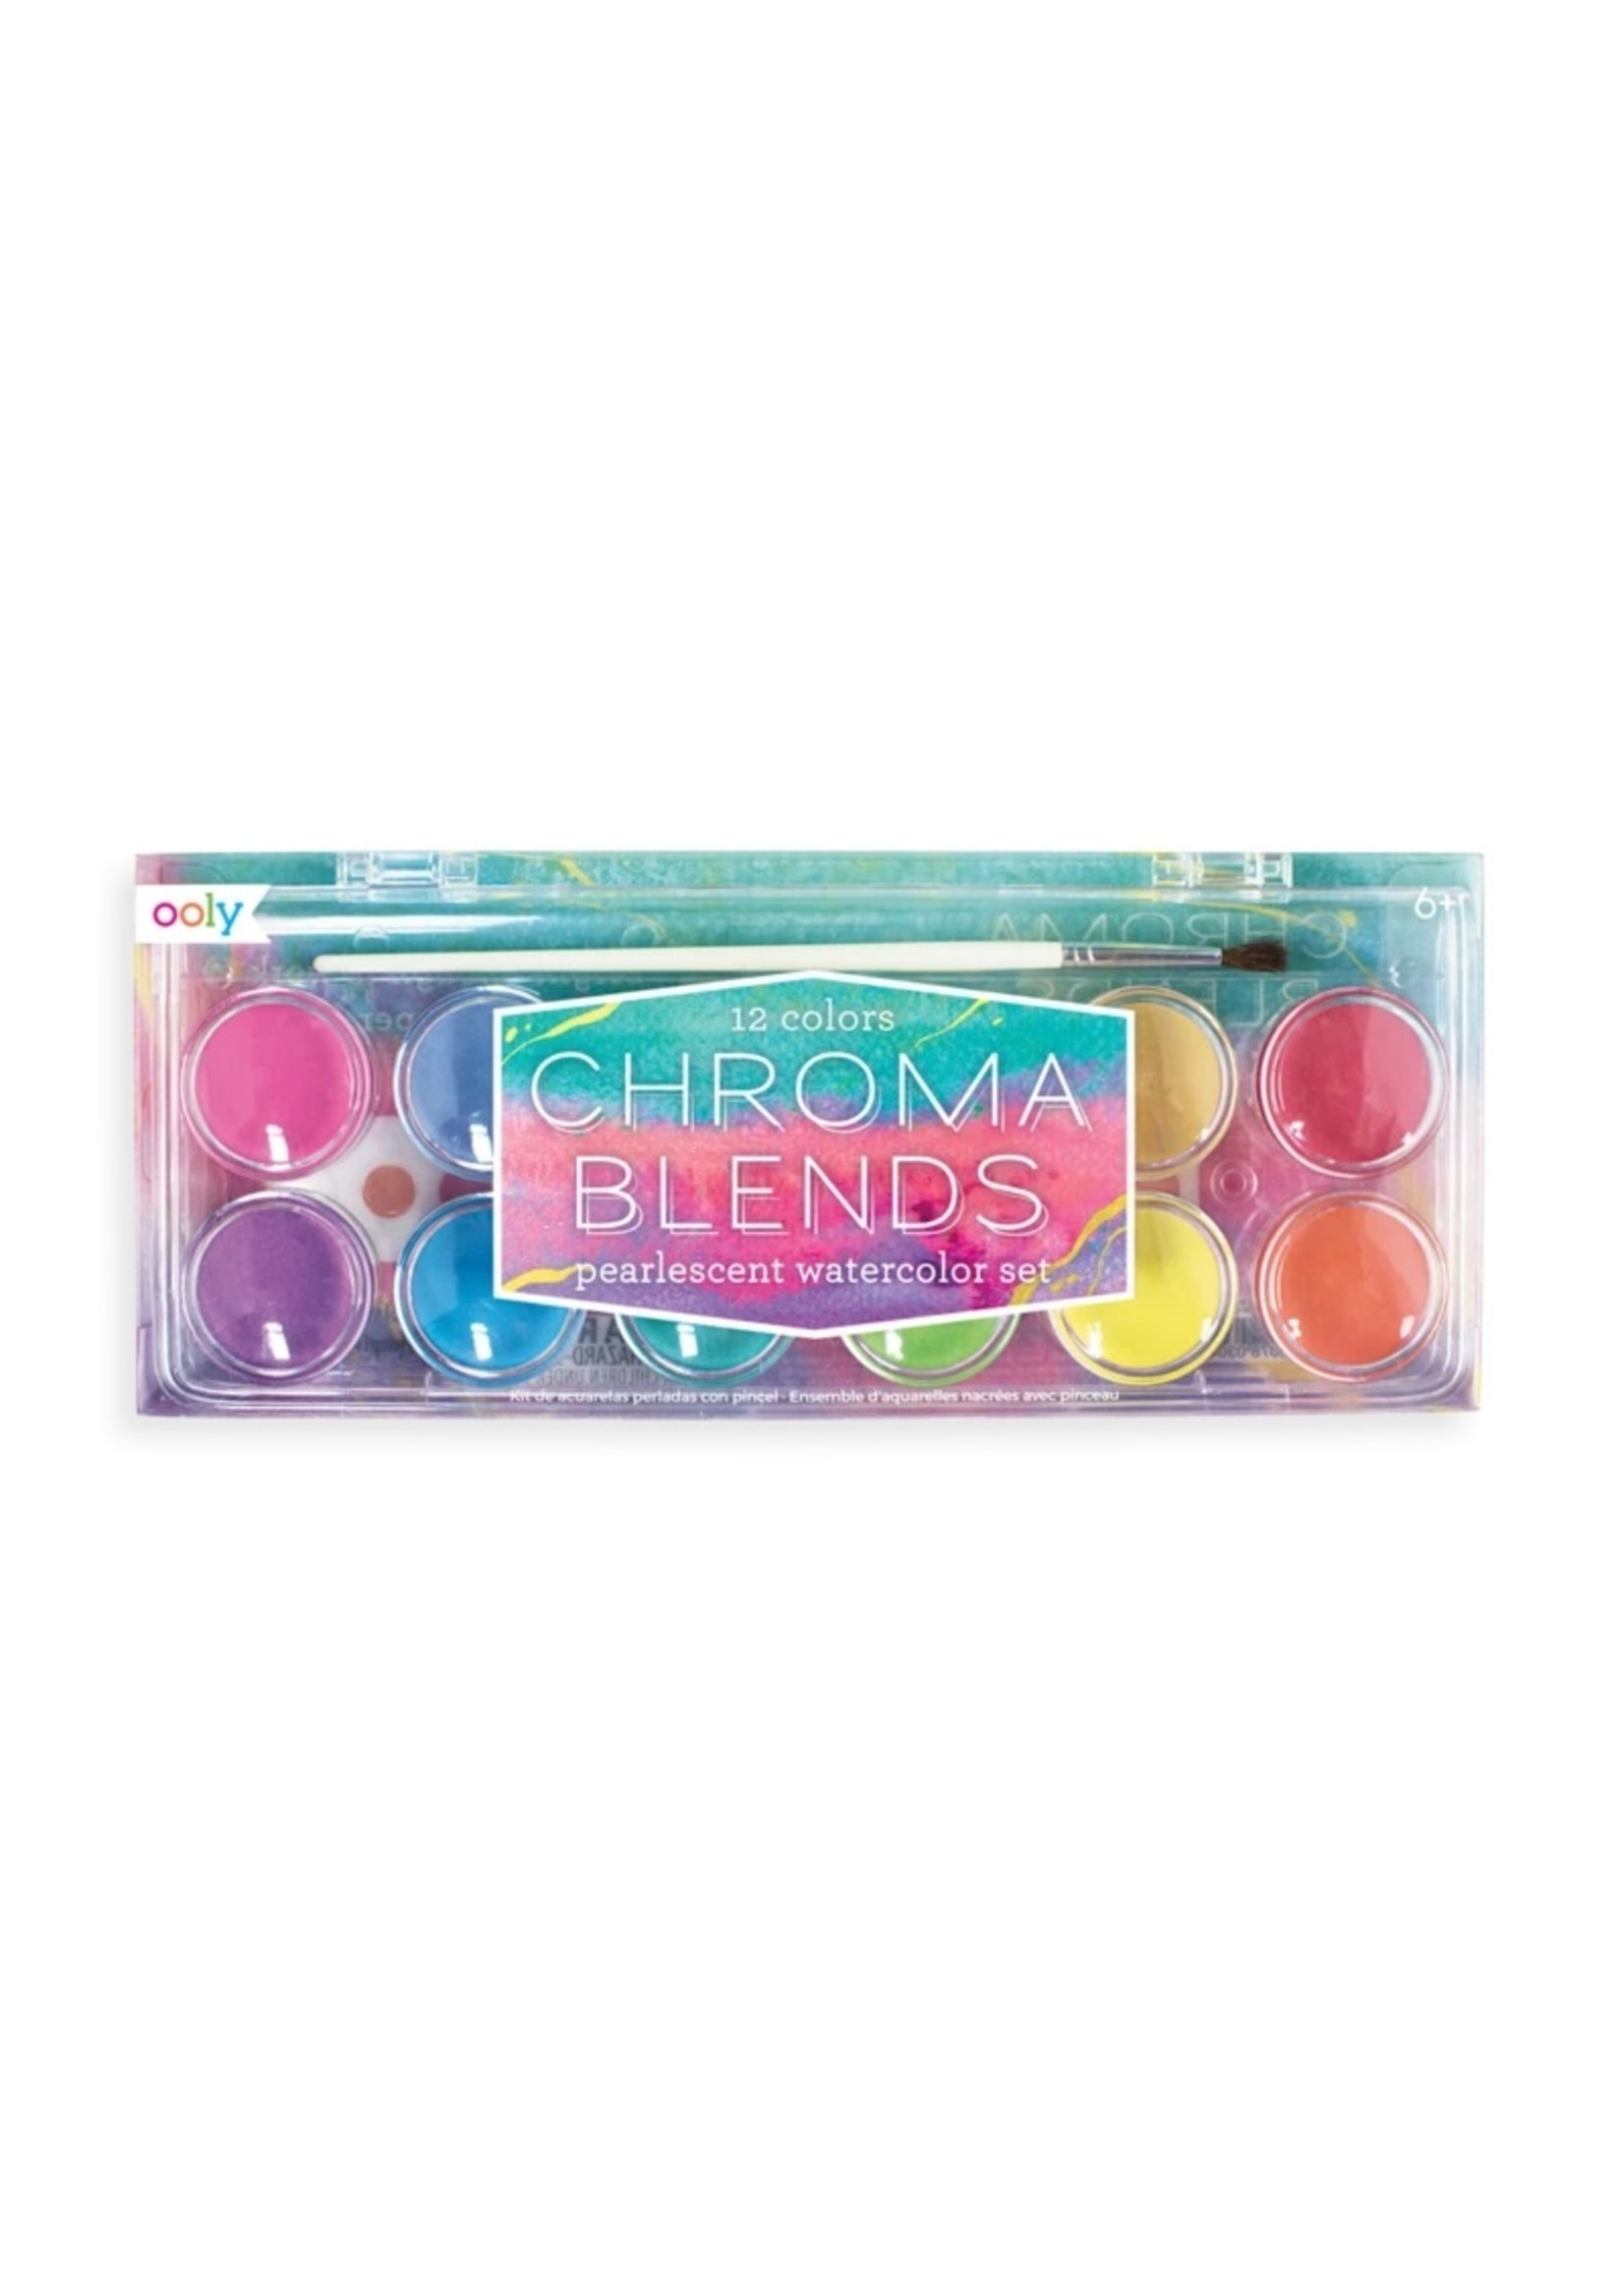 Ooly Chroma Blends Watercolor Paint Set - Pearlescent